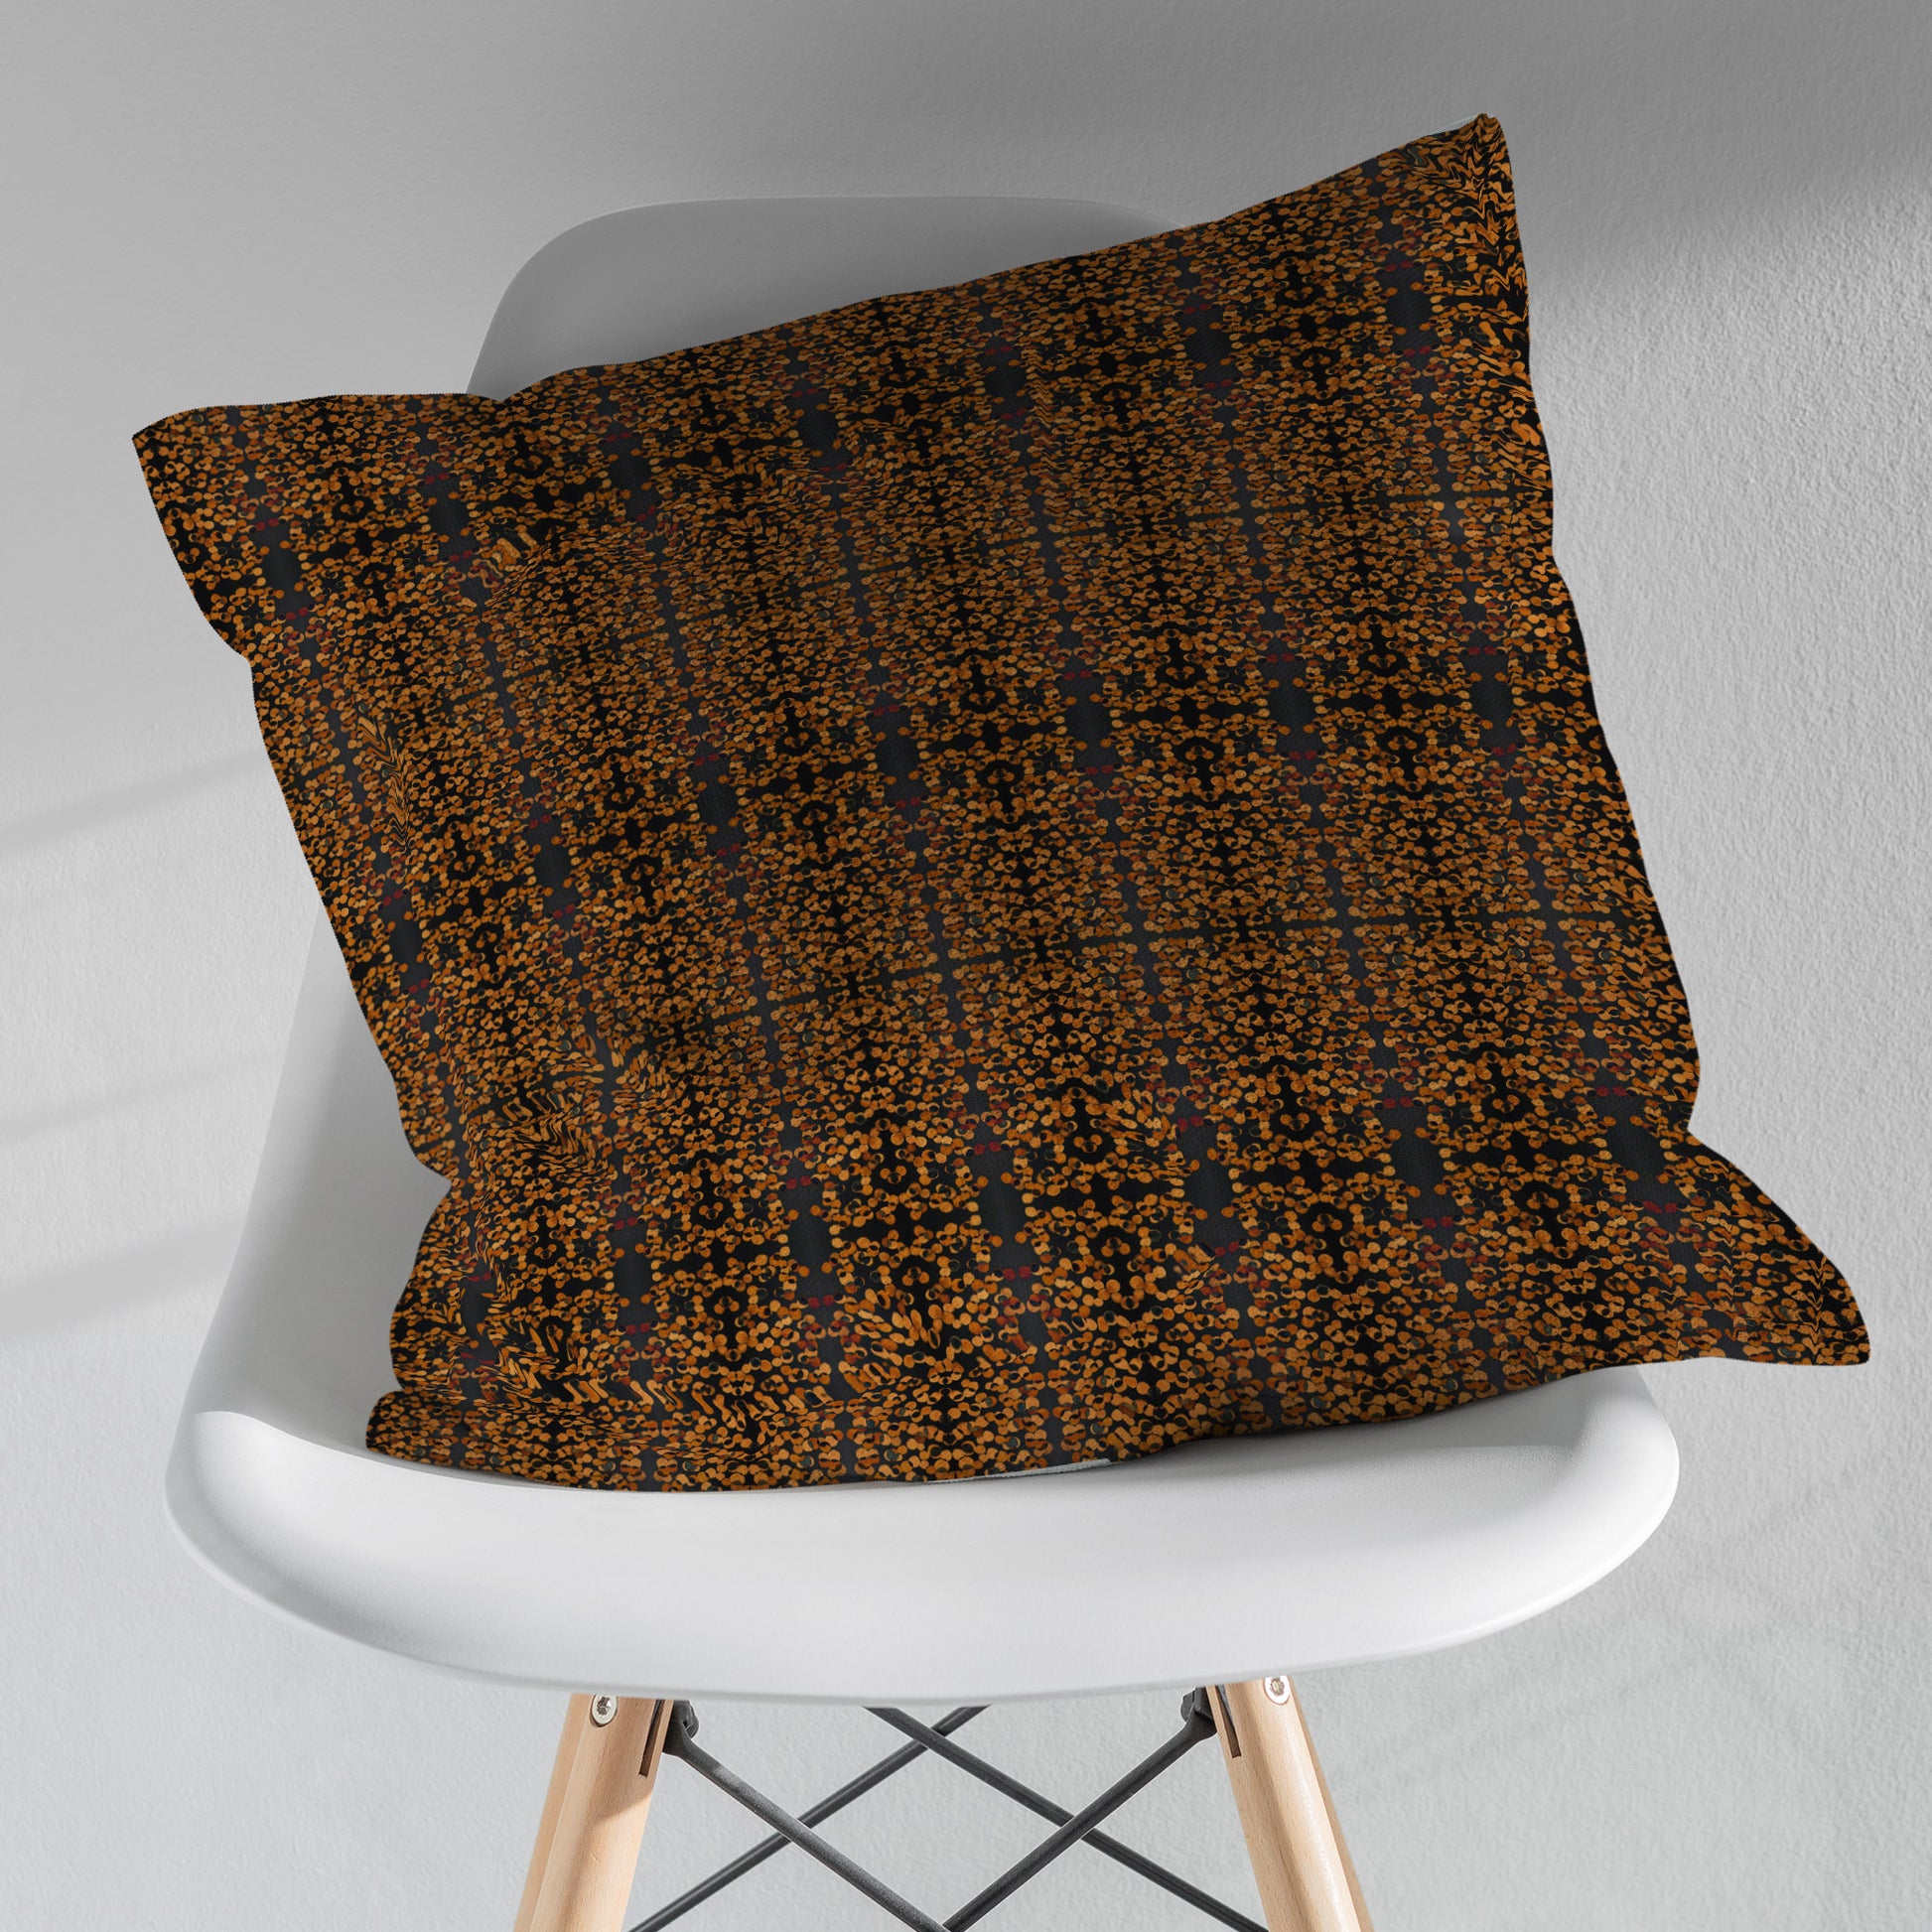 Copper and black abstract pattern sitting on a white modernist chair